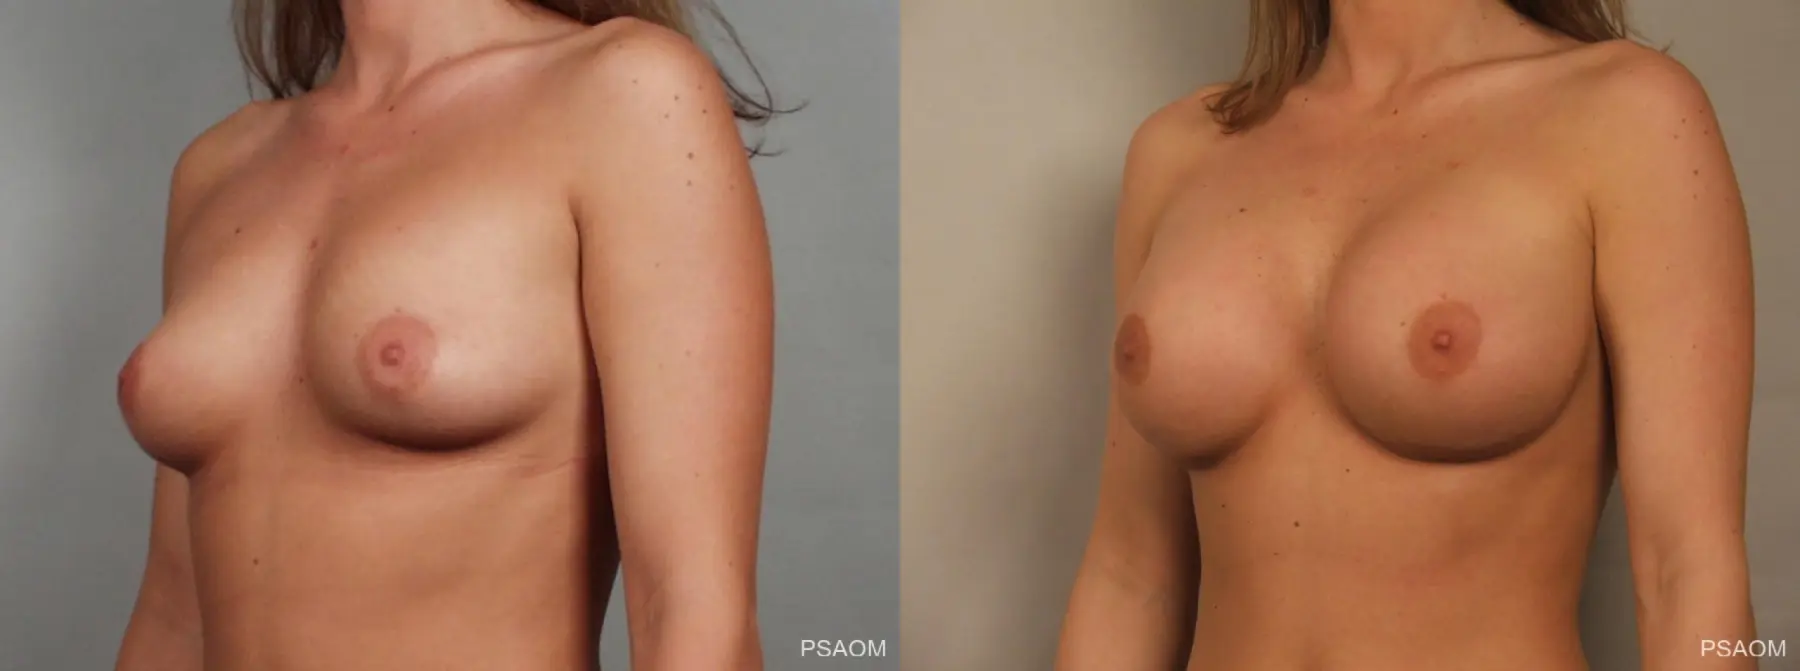 Breast Augmentation: Patient 1 - Before and After 3